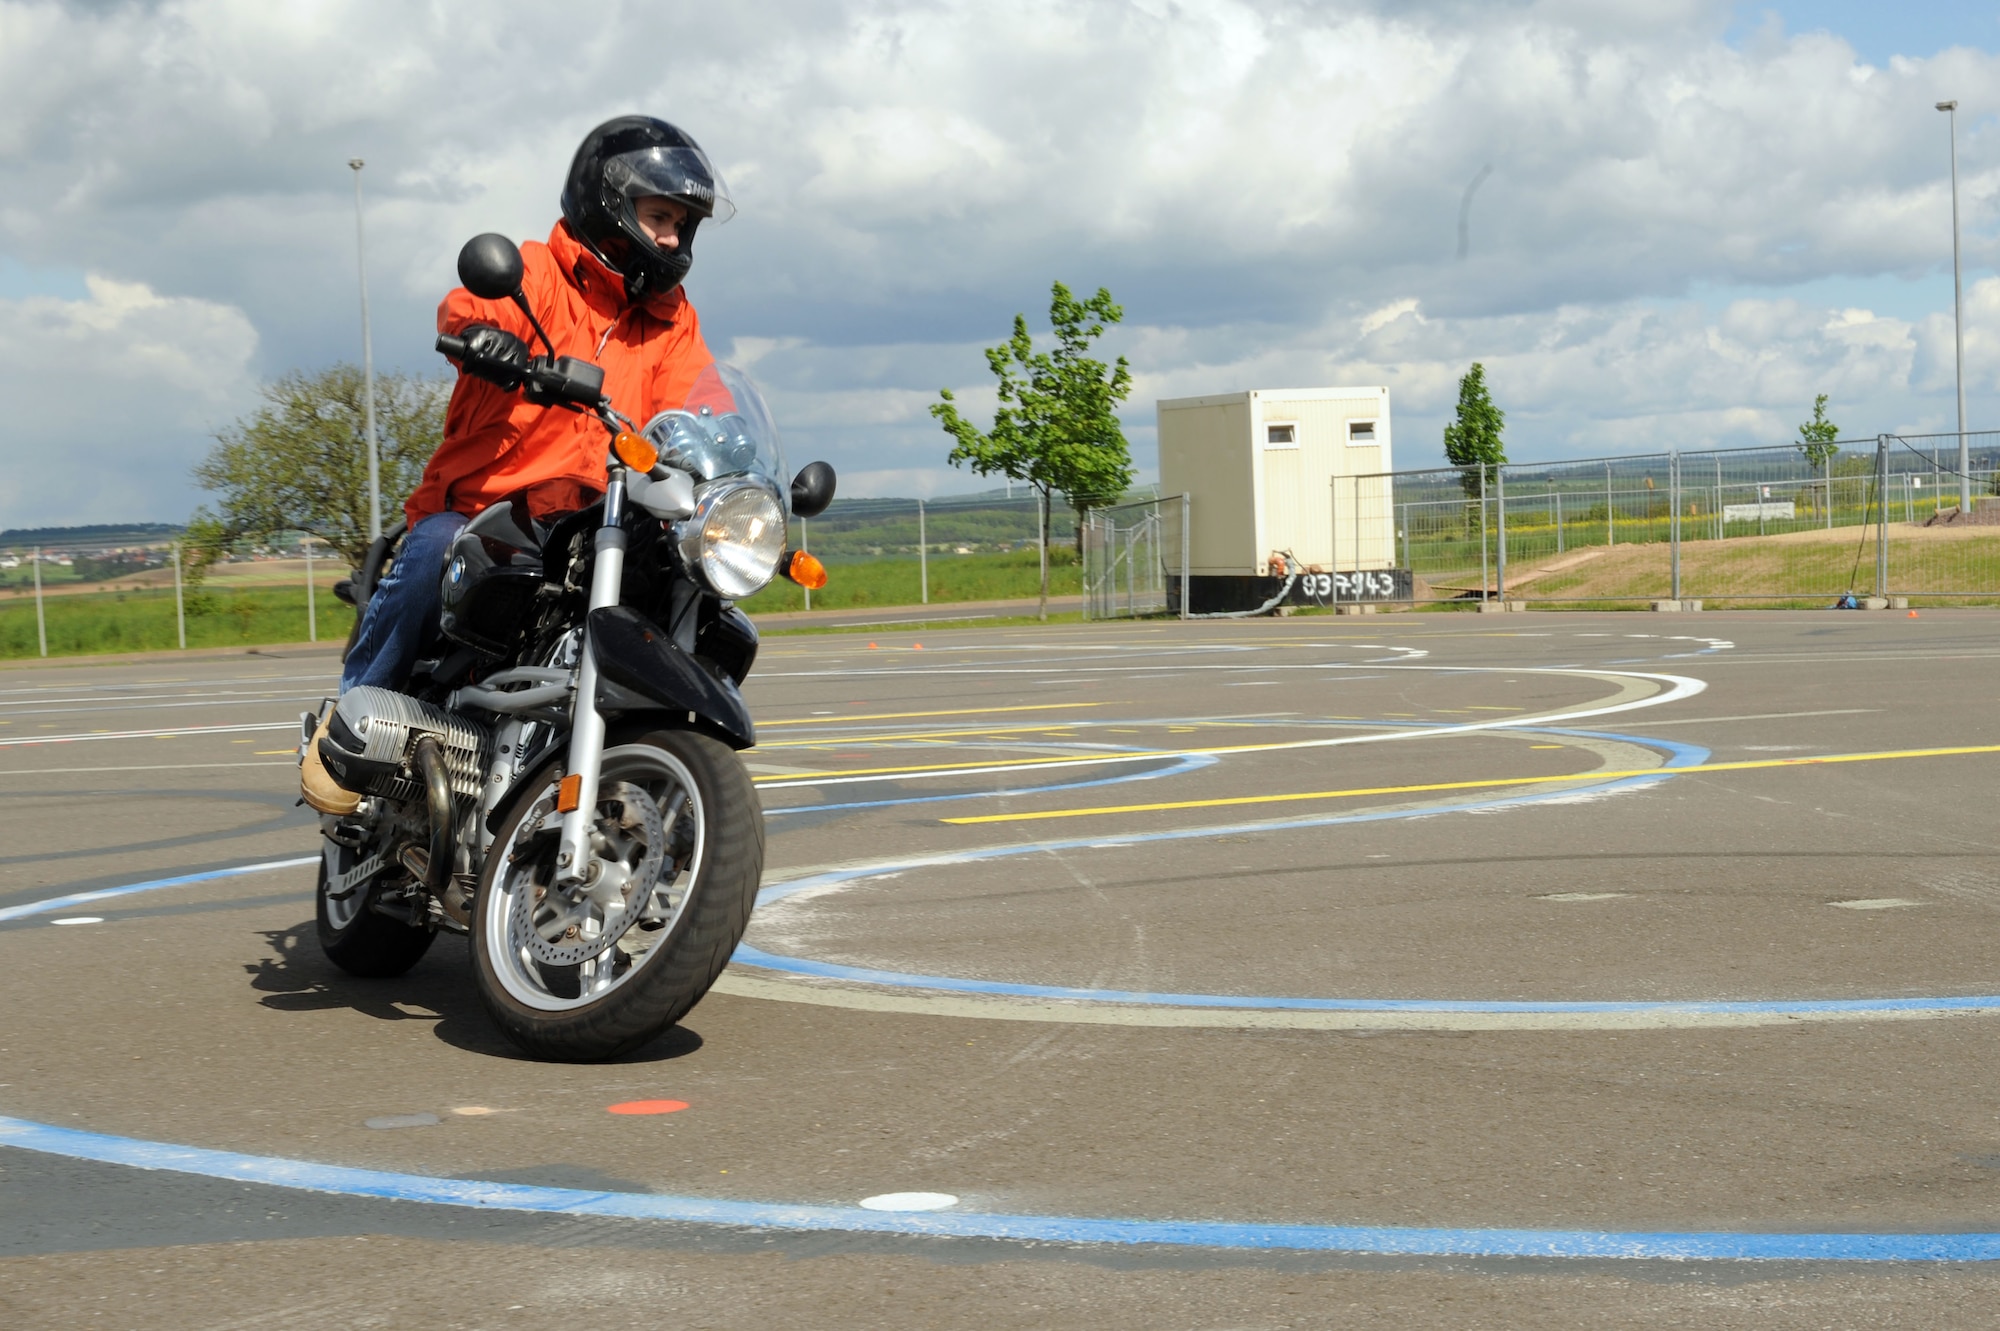 SPANGDAHLEM AIR BASE, Germany – Maj. Erik Olsen, 52nd Operations Support Squadron, maneuvers his motorcycle around a turn during a motorcycle safety class at the Saber driving course here May 15. The course participants practiced maneuvers to include path of travel, quick stops and obstacle avoidance. The class is geared to improve riders’ skill by performing different maneuvers on the course as well as discussing and reviewing a variety of safety information. The 52nd Fighter Wing Safety office conducts the motorcycle safety course three times monthly. U.S Air Forces in Europe regulations mandate that every motorcyclist on base must take or retake this class once every three years to keep their skillset current. (U.S. Air Force photo by Senior Airman Christopher Toon/Released)